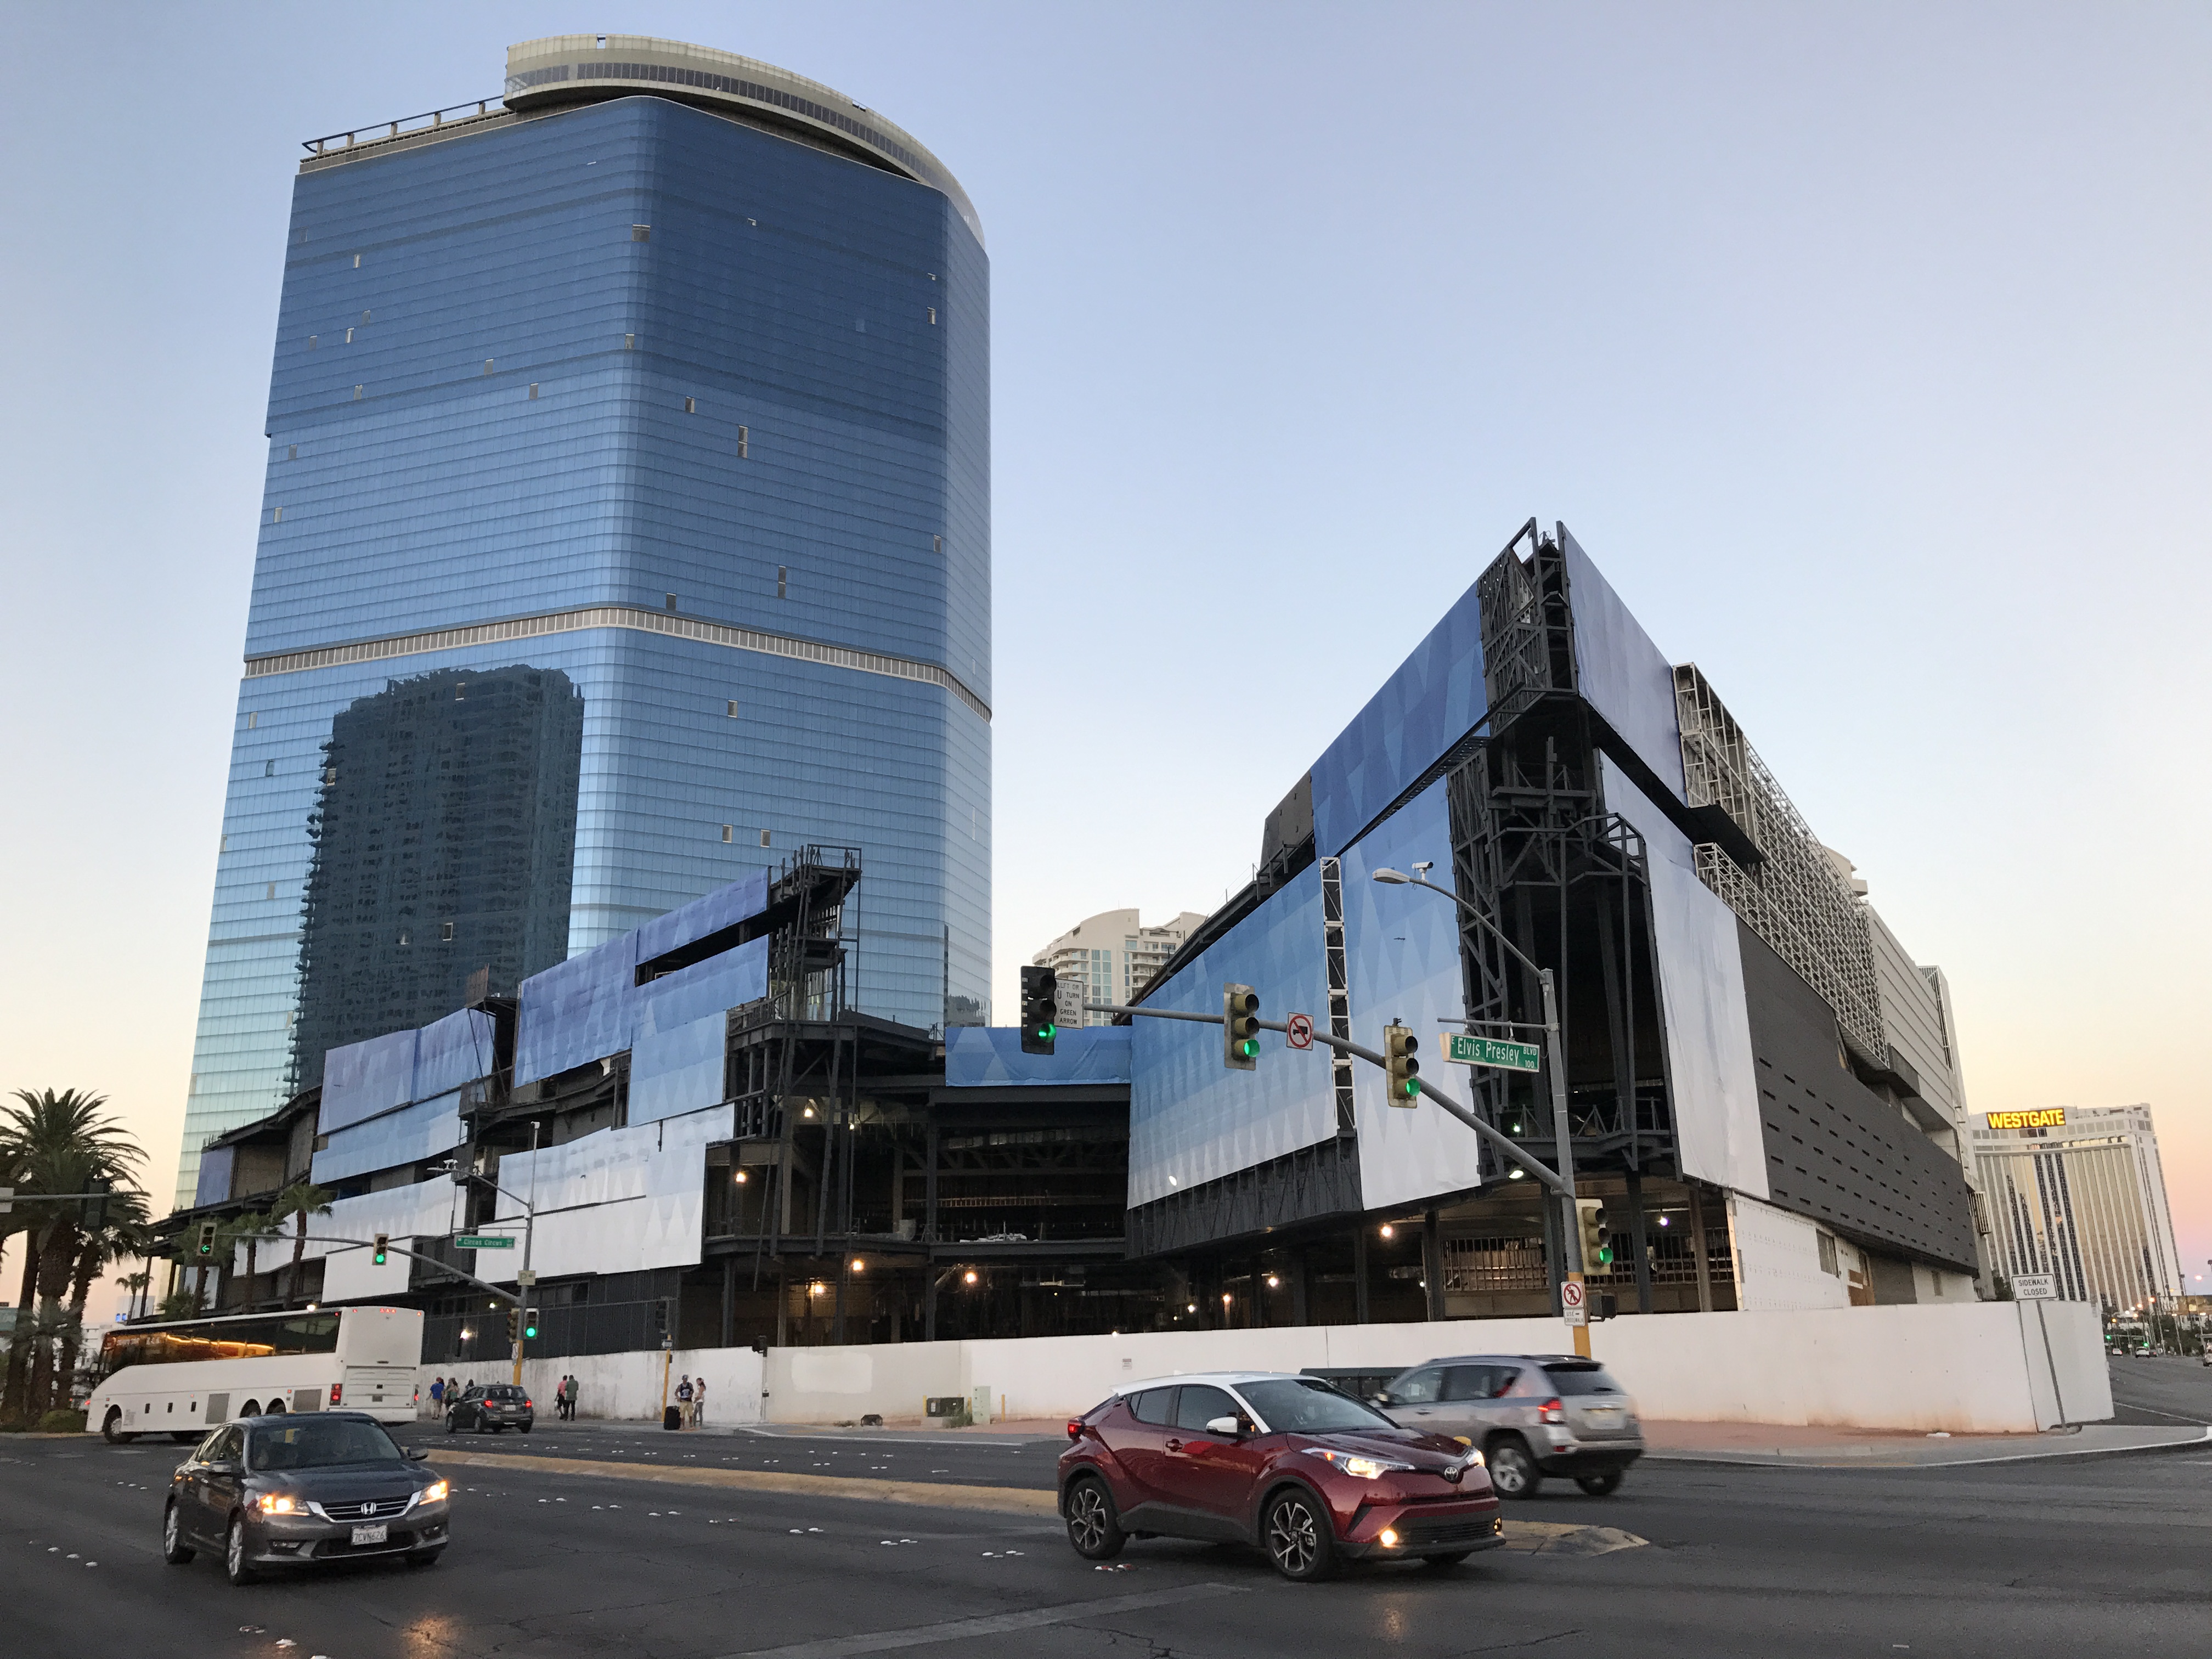 Riviera casino closes after 60 years on Vegas Strip with guests like Elvis